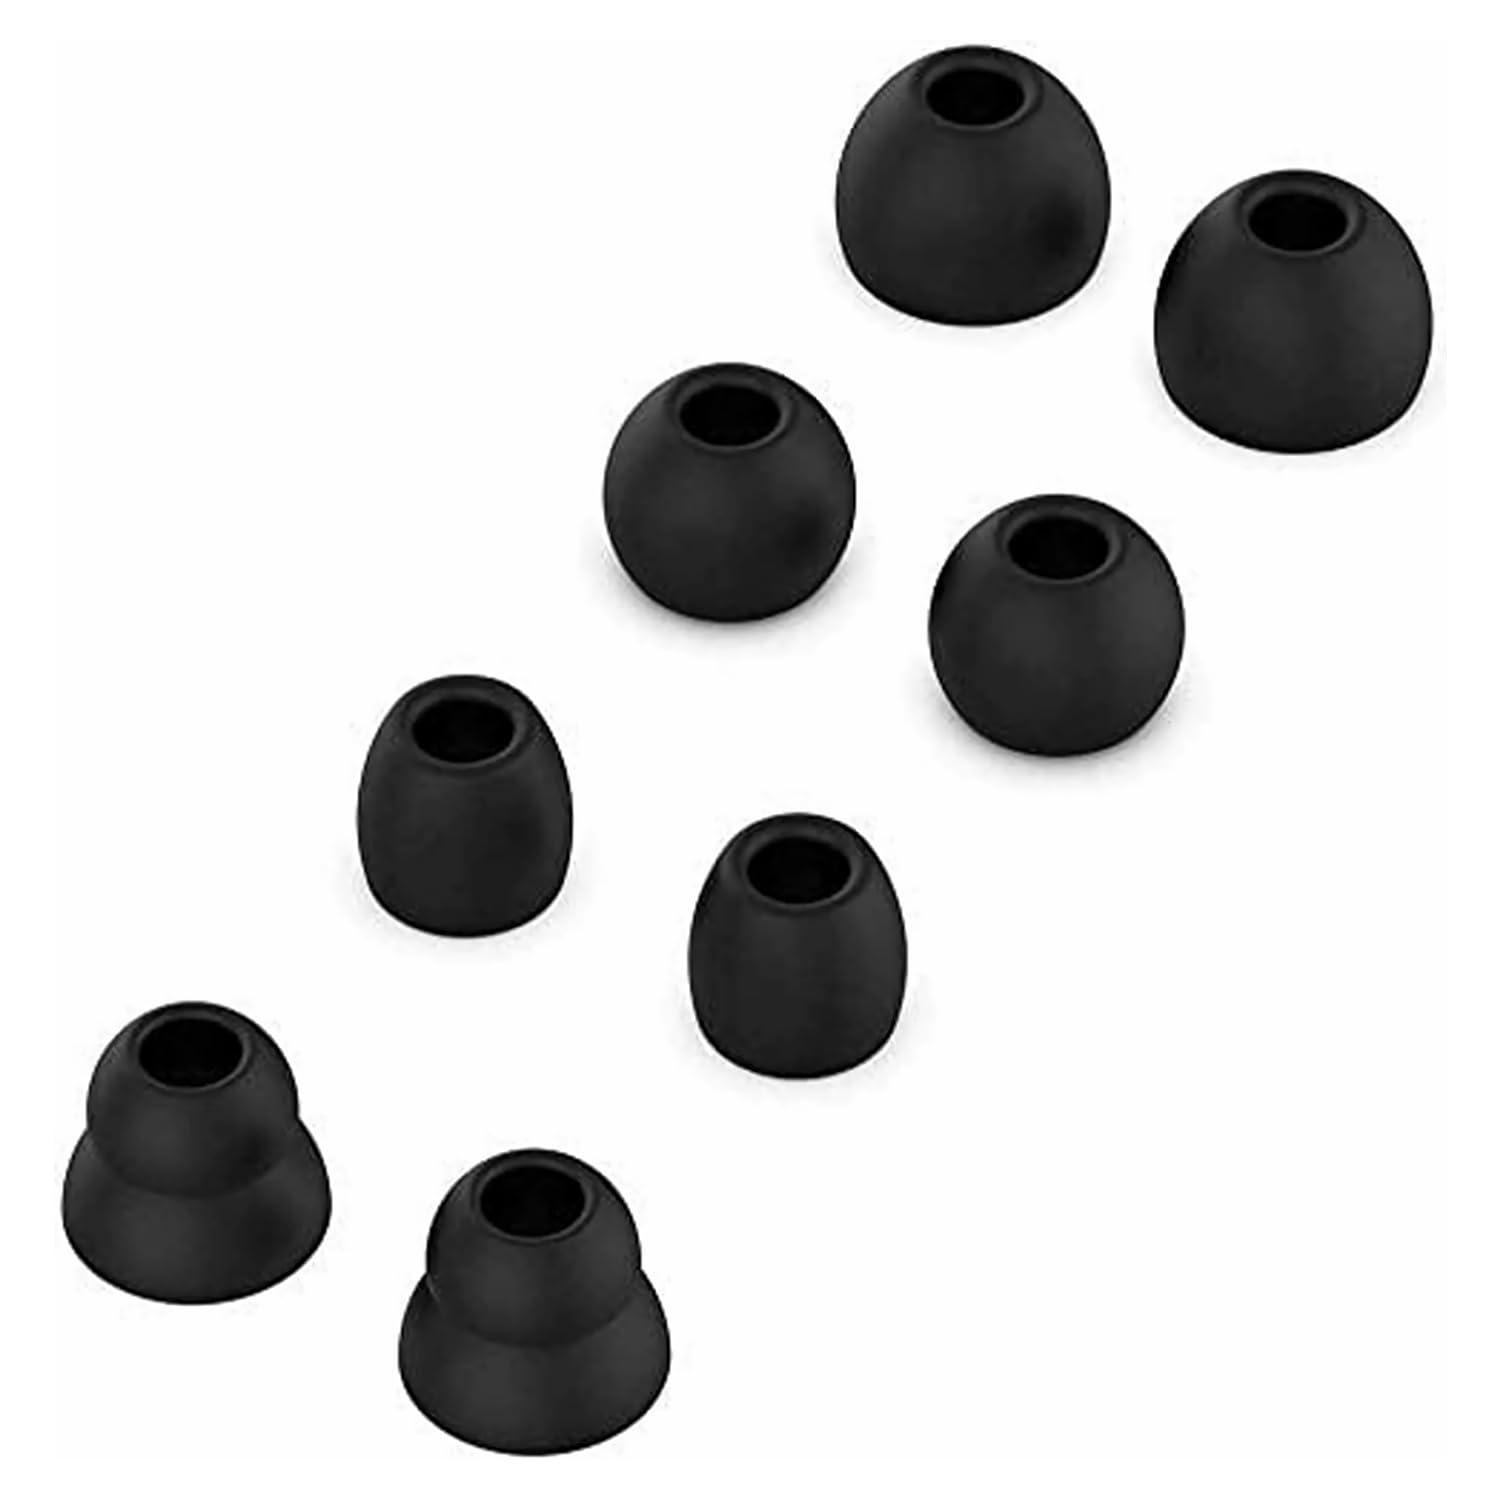 Adhiper Replacement Earbuds Silicone Ear Buds Tips Compatible with Beats by dr dre Powerbeats Pro Wireless Earphones (Black 8pcs)